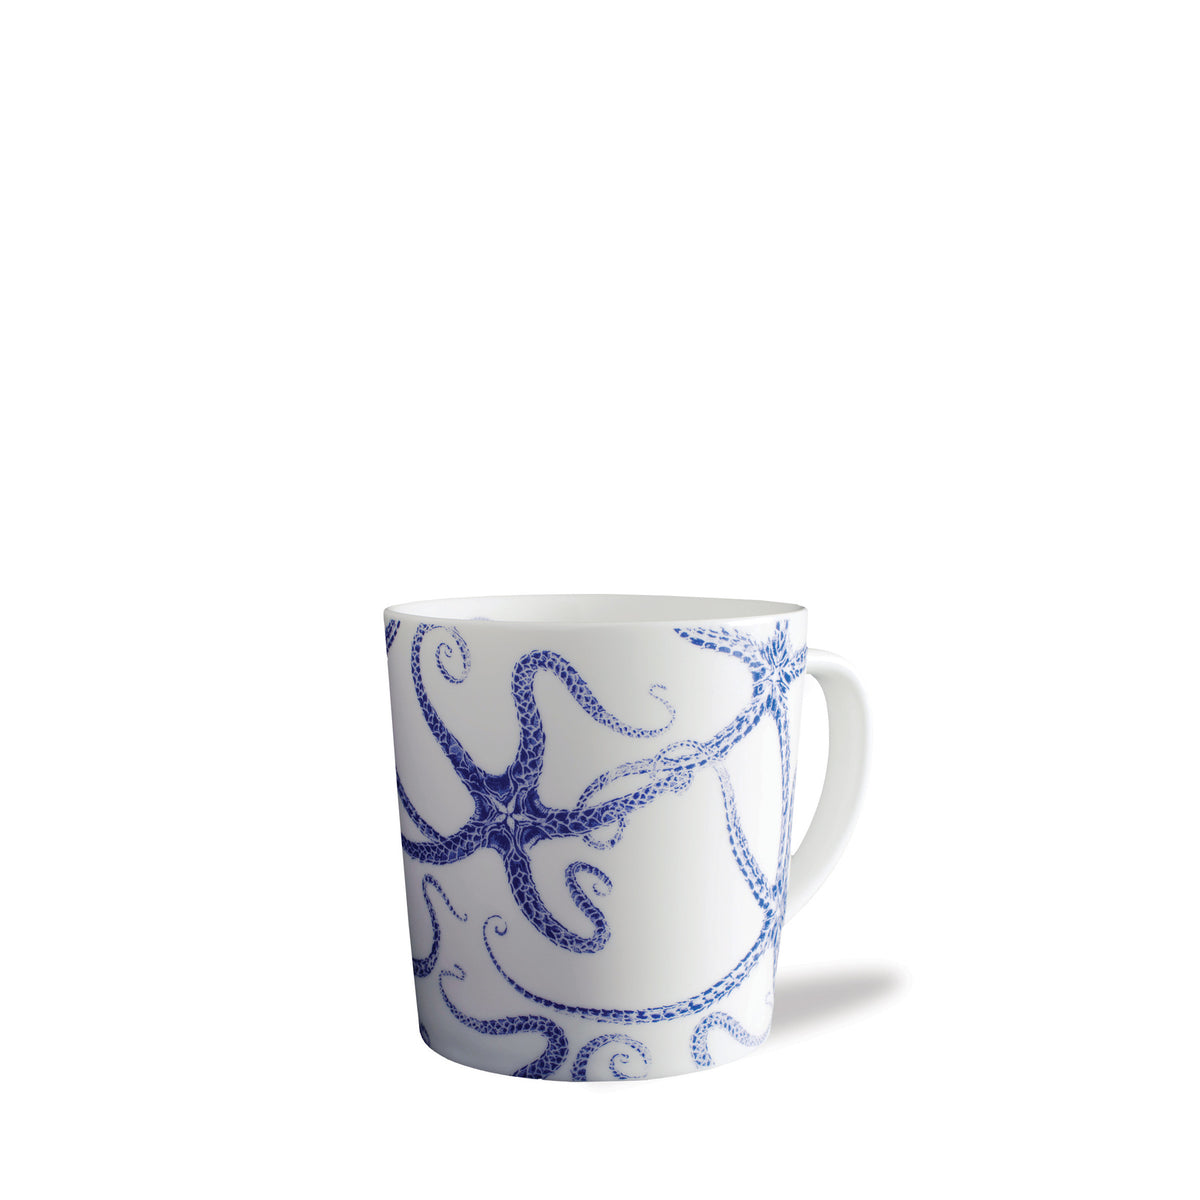 High-fired porcelain Starfish Mug by Caskata Artisanal Home with a blue octopus design; it&#39;s dishwasher safe and perfect for ocean lovers.